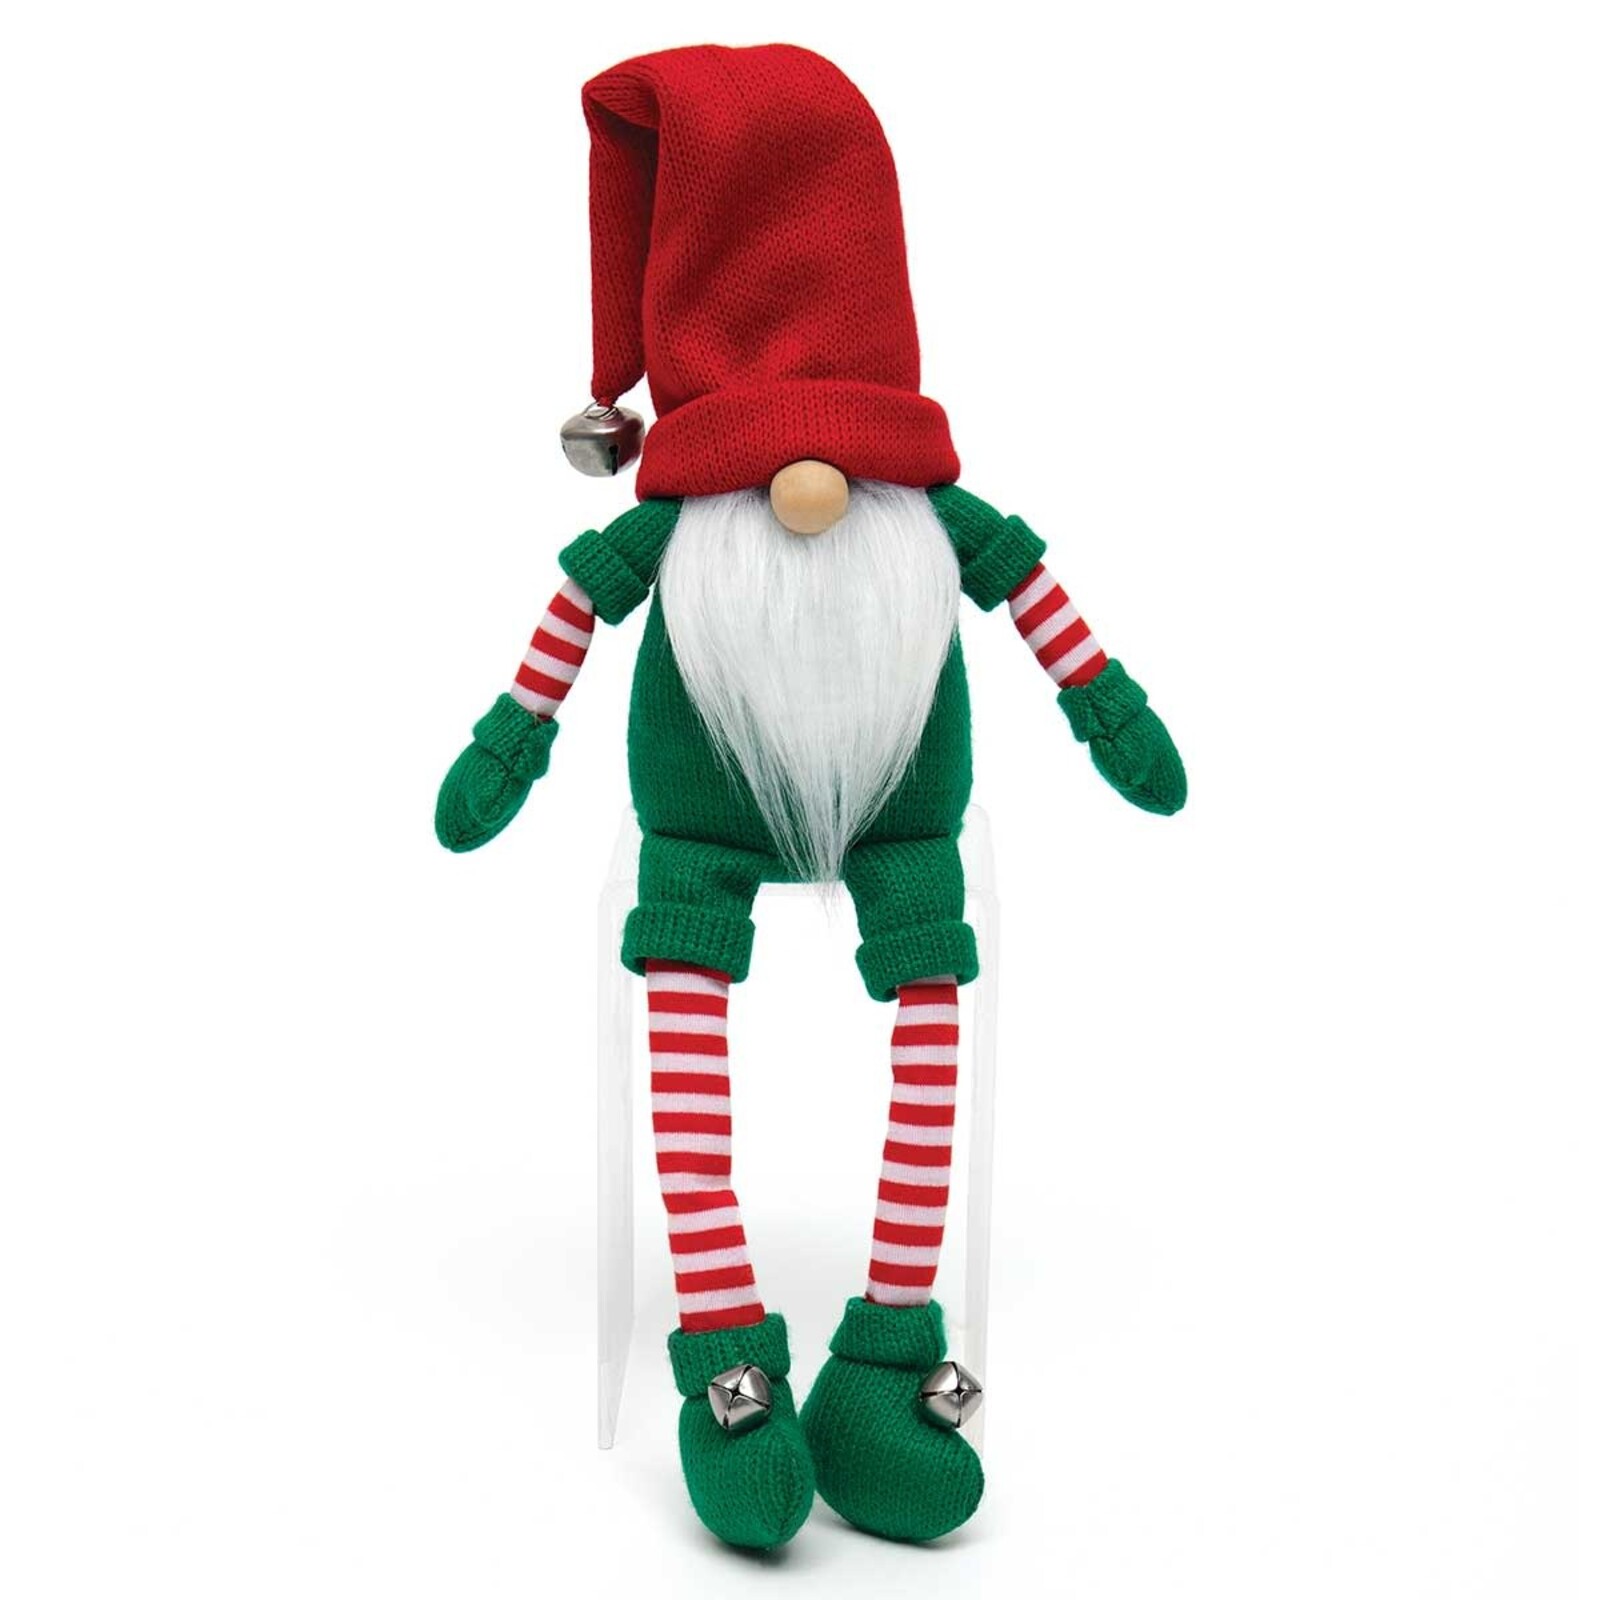 Meravic ELF GNOME RED/GREEN WITH JINGLE BELLS  R8710 loading=